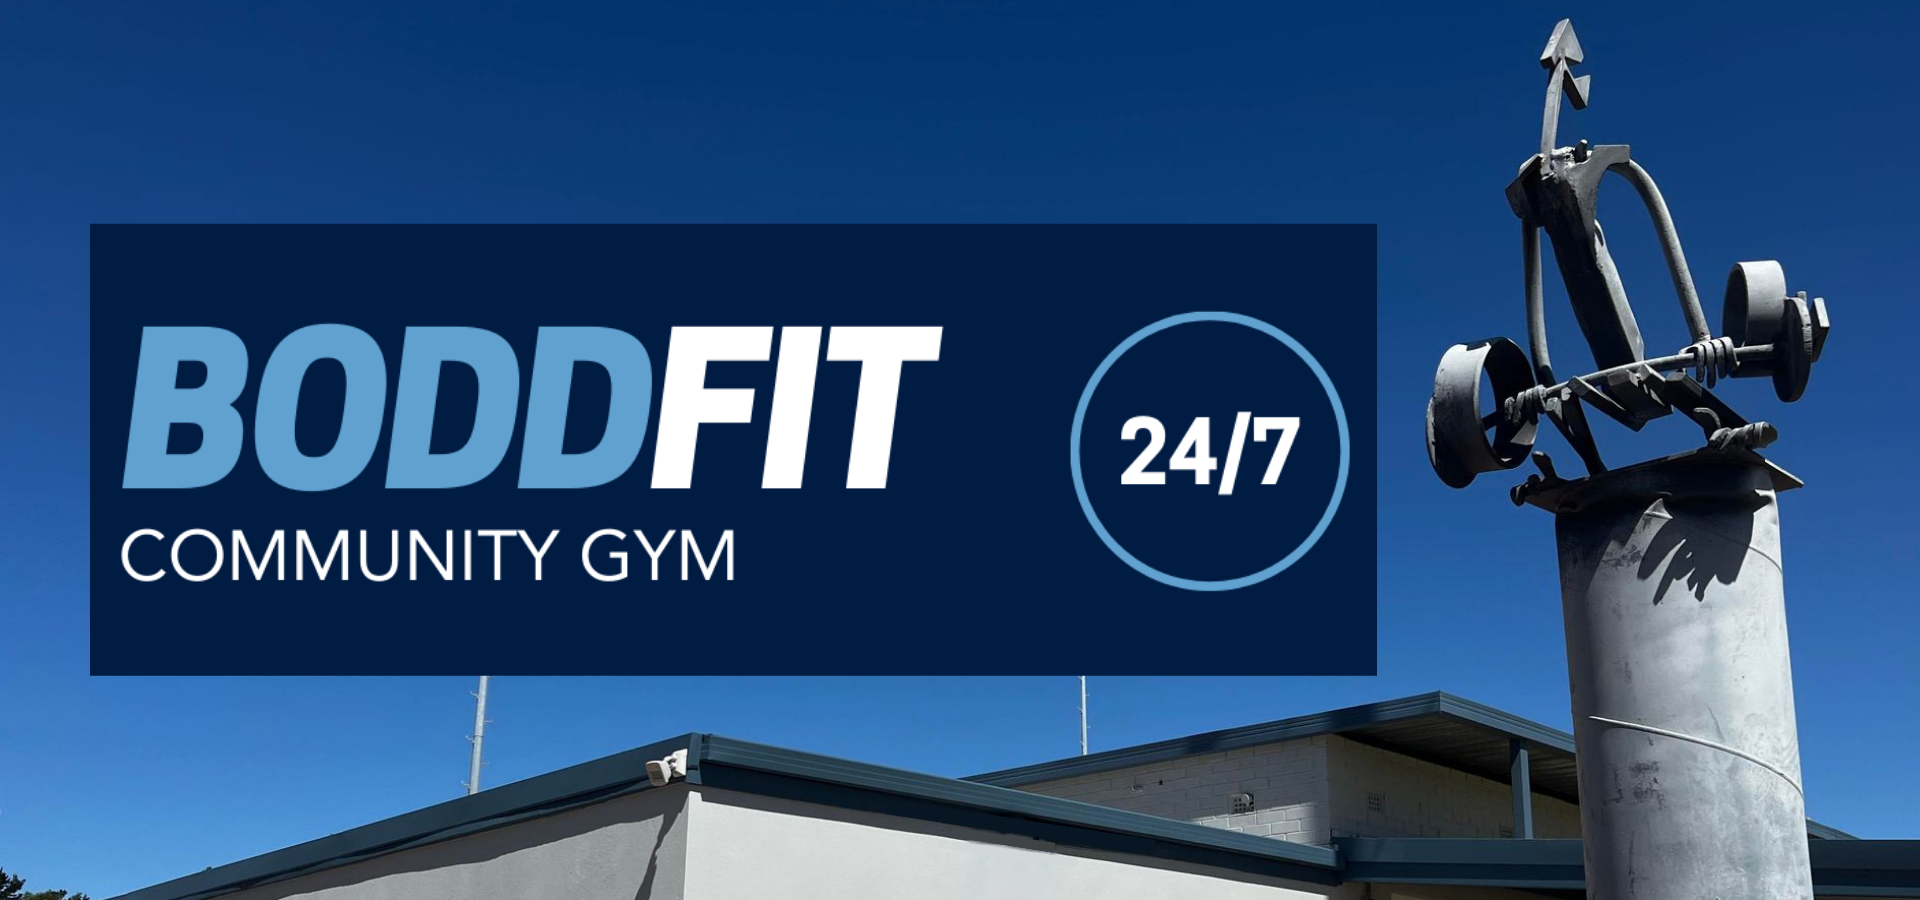 February Opening for BoddFit!